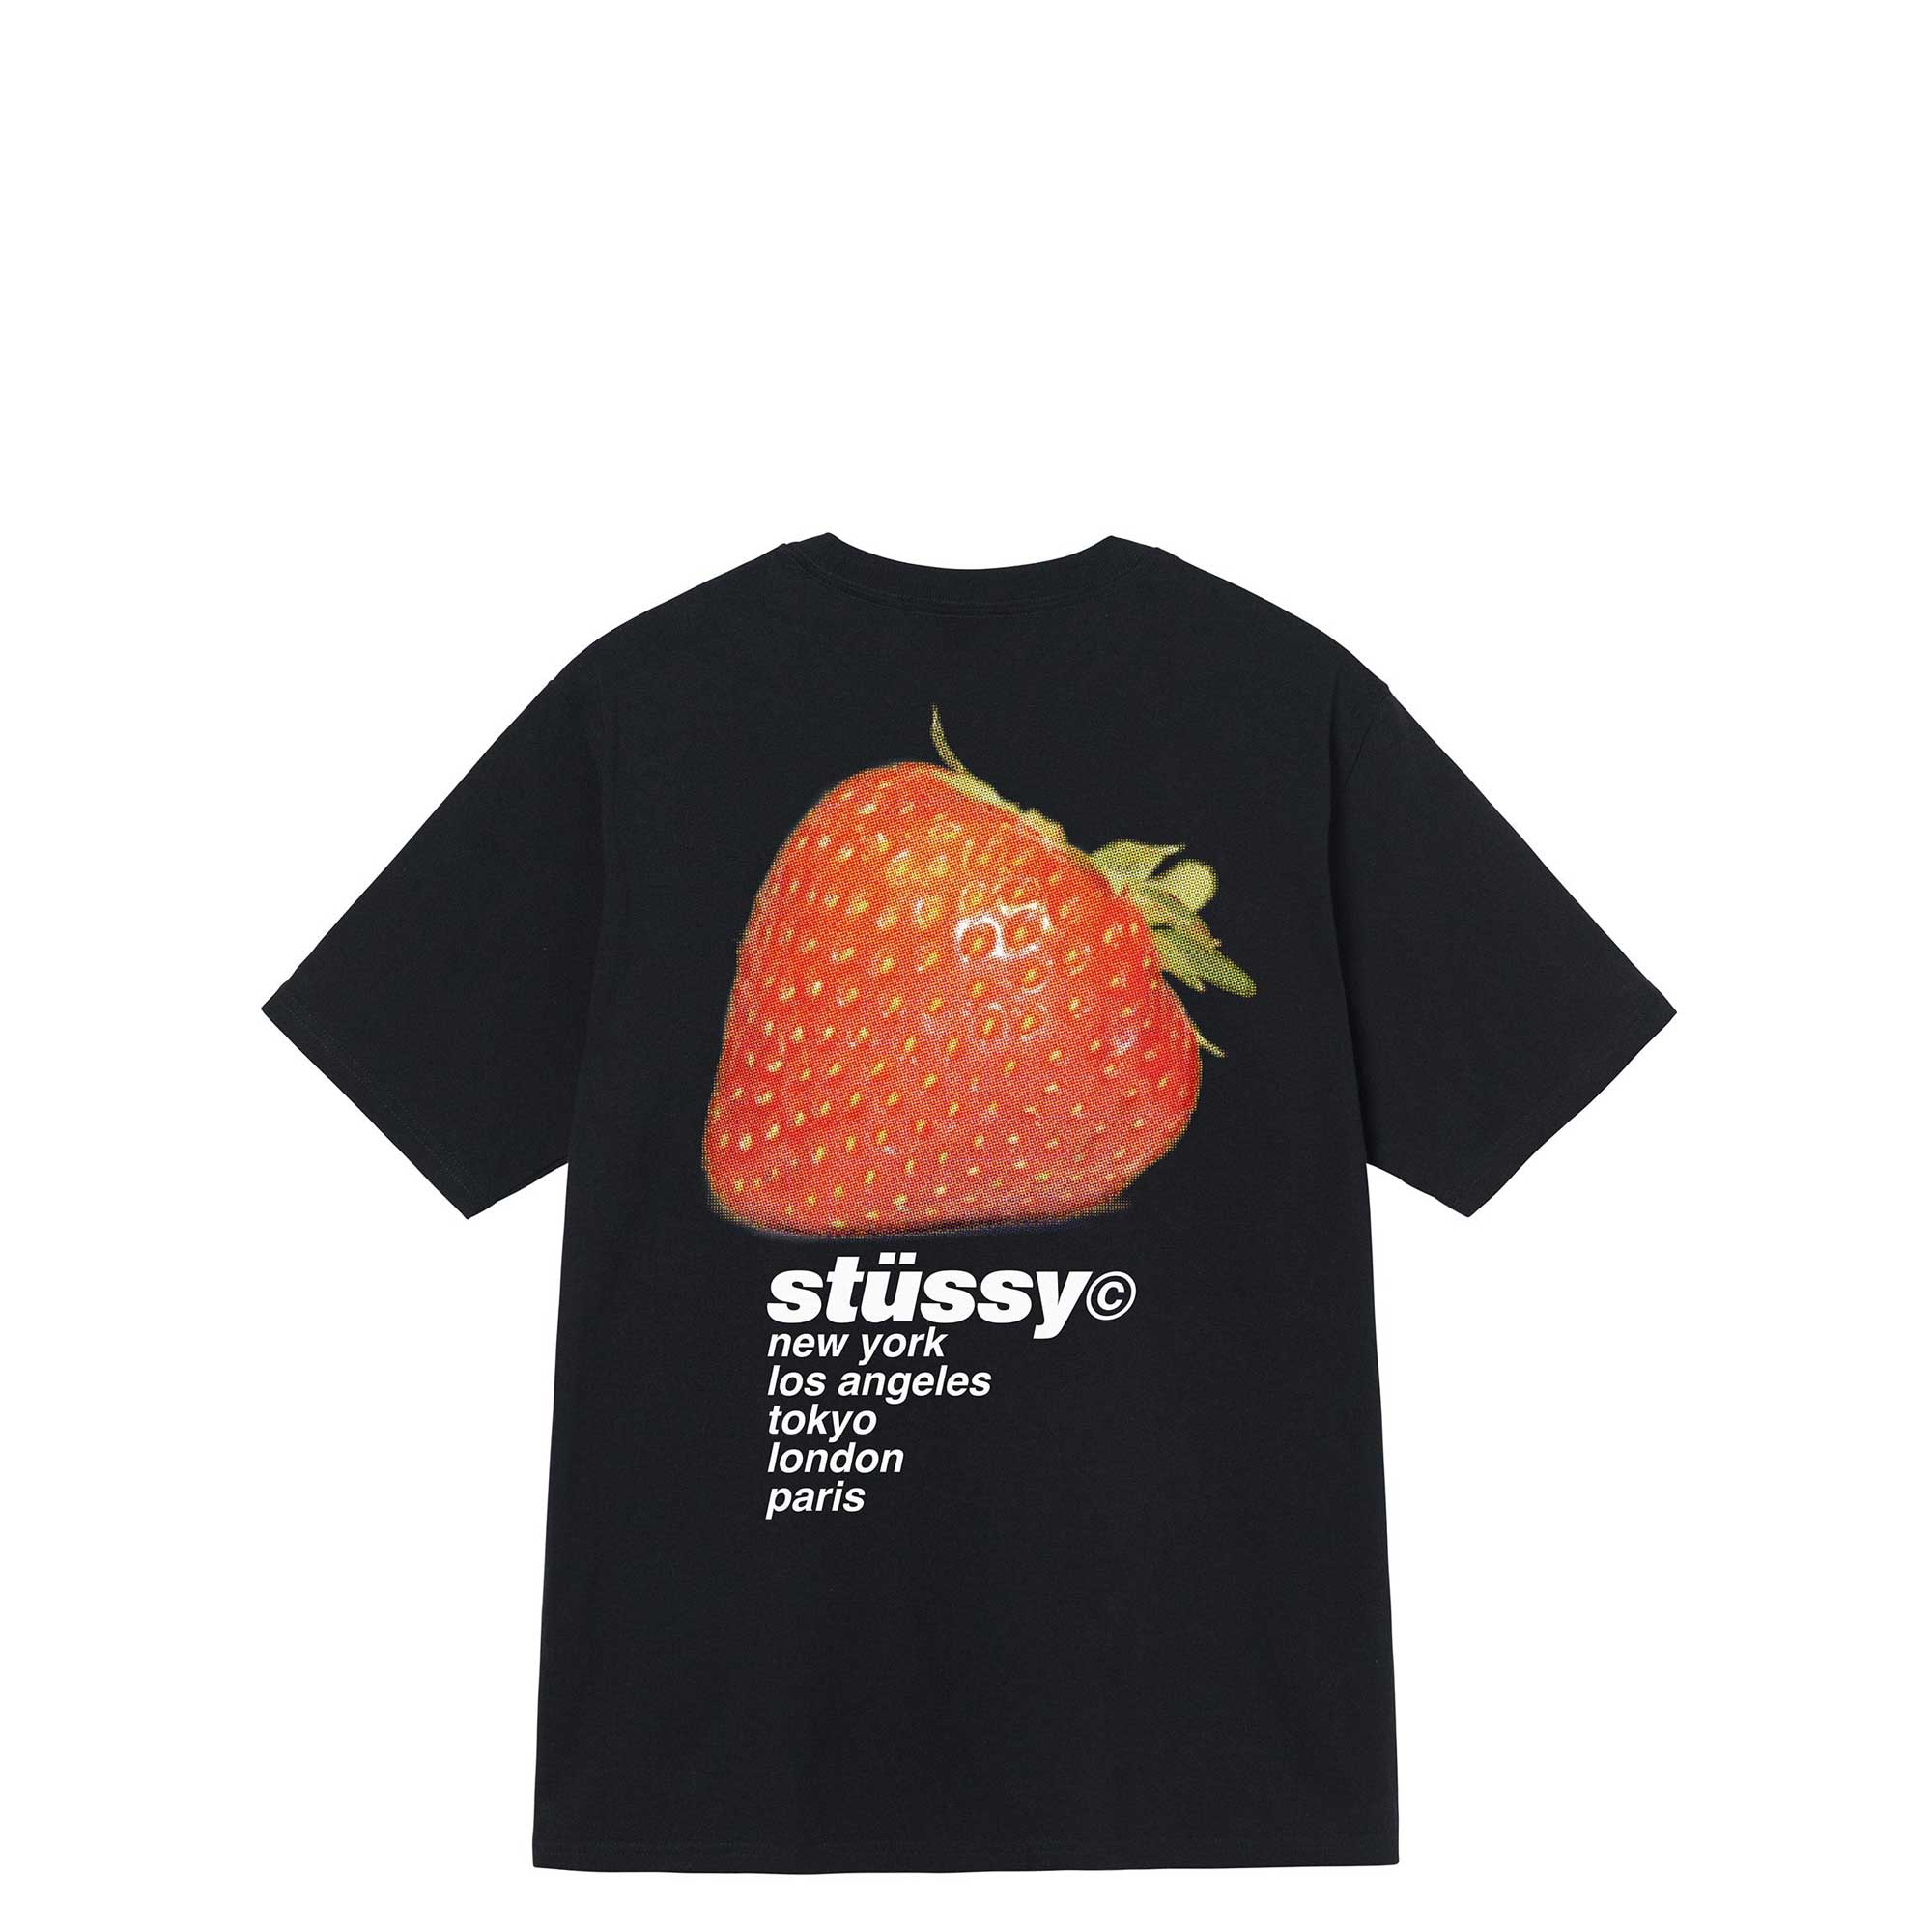 Tricotto Black strawberry shirt Size: small MSRP: - Depop